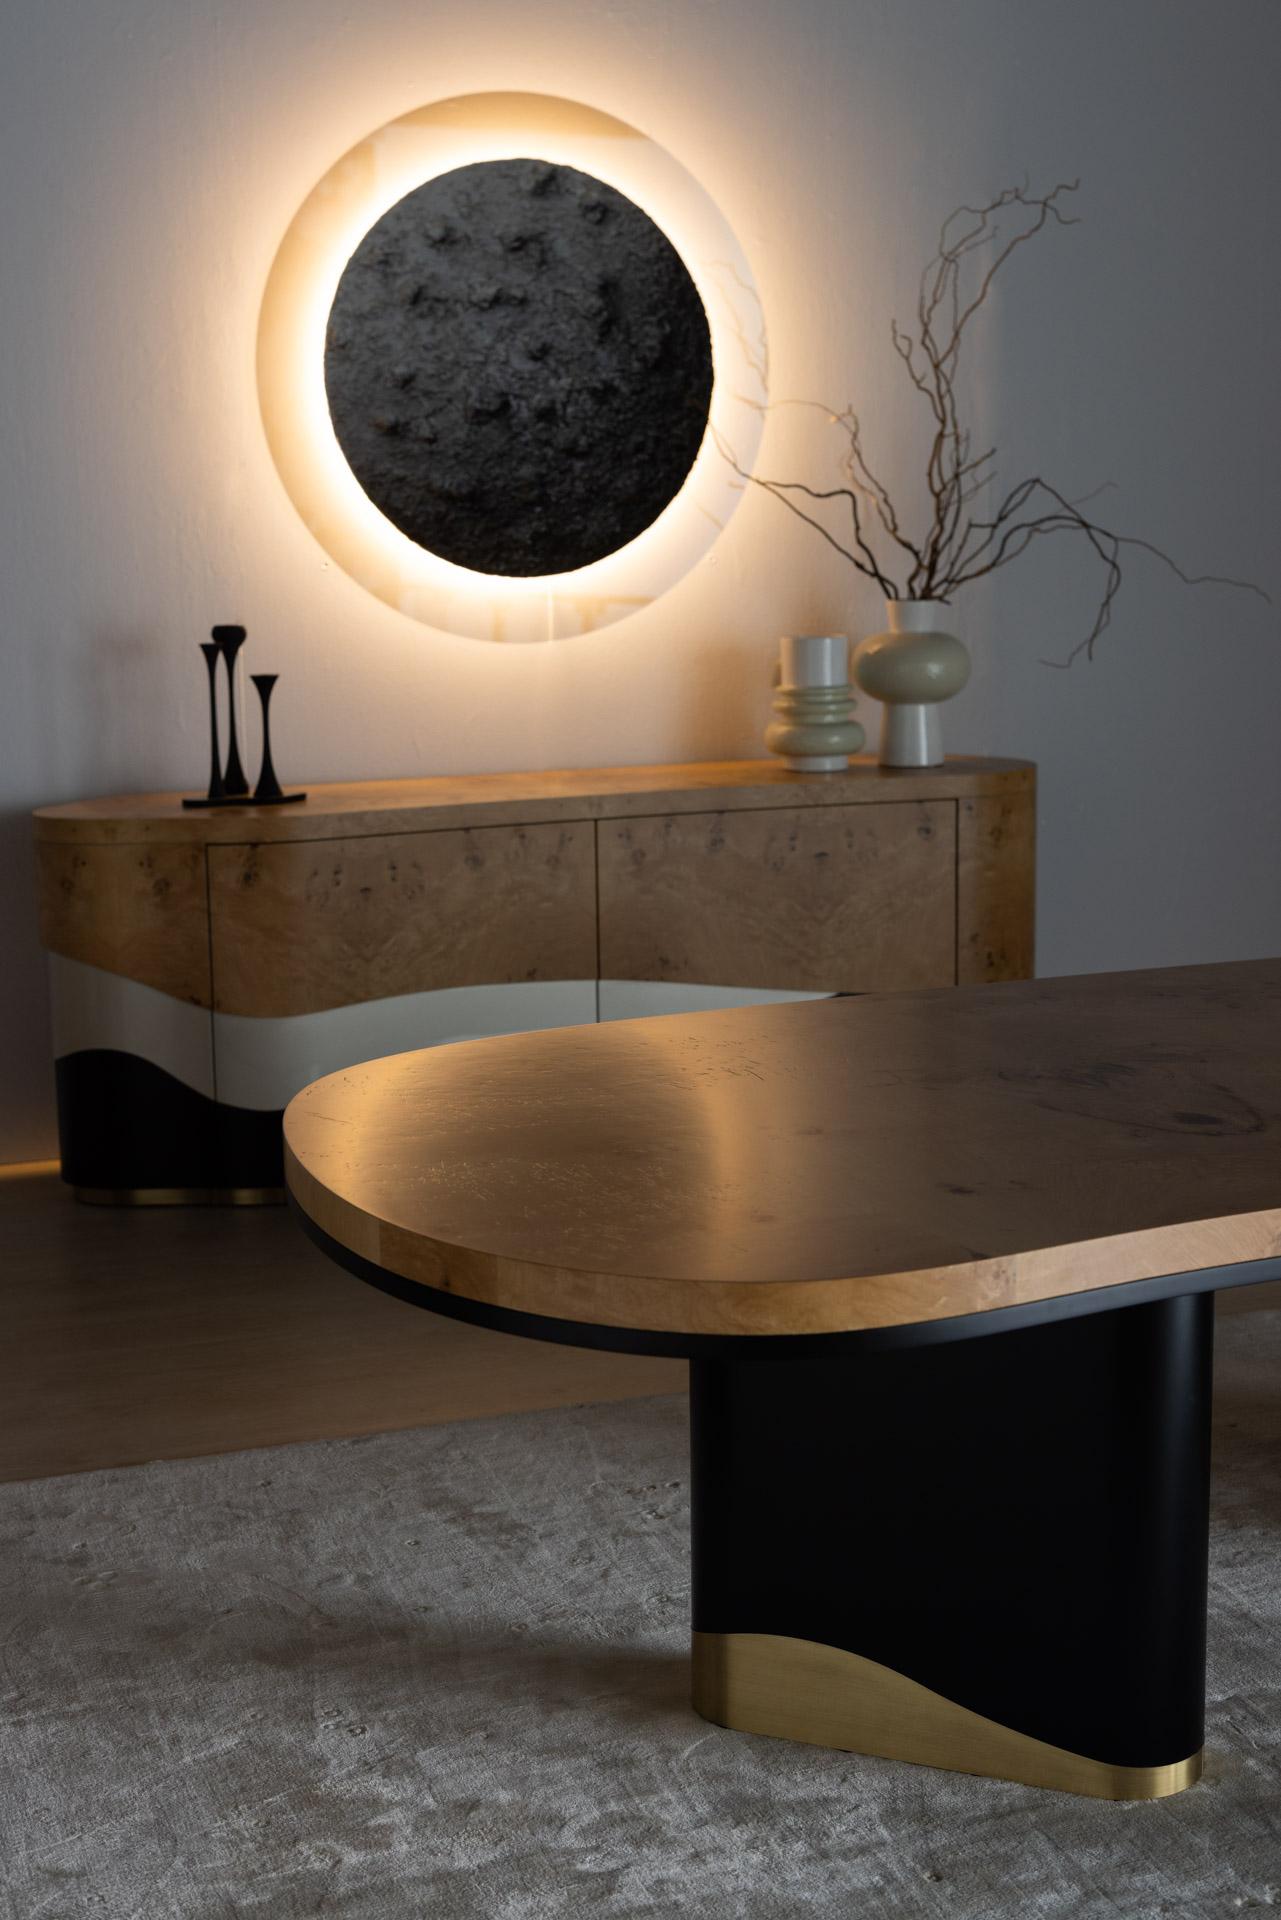 Hand-Crafted Modern Moon Wall Art Sculpture Piece, Light, Handmade in Portugal by Greenapple For Sale